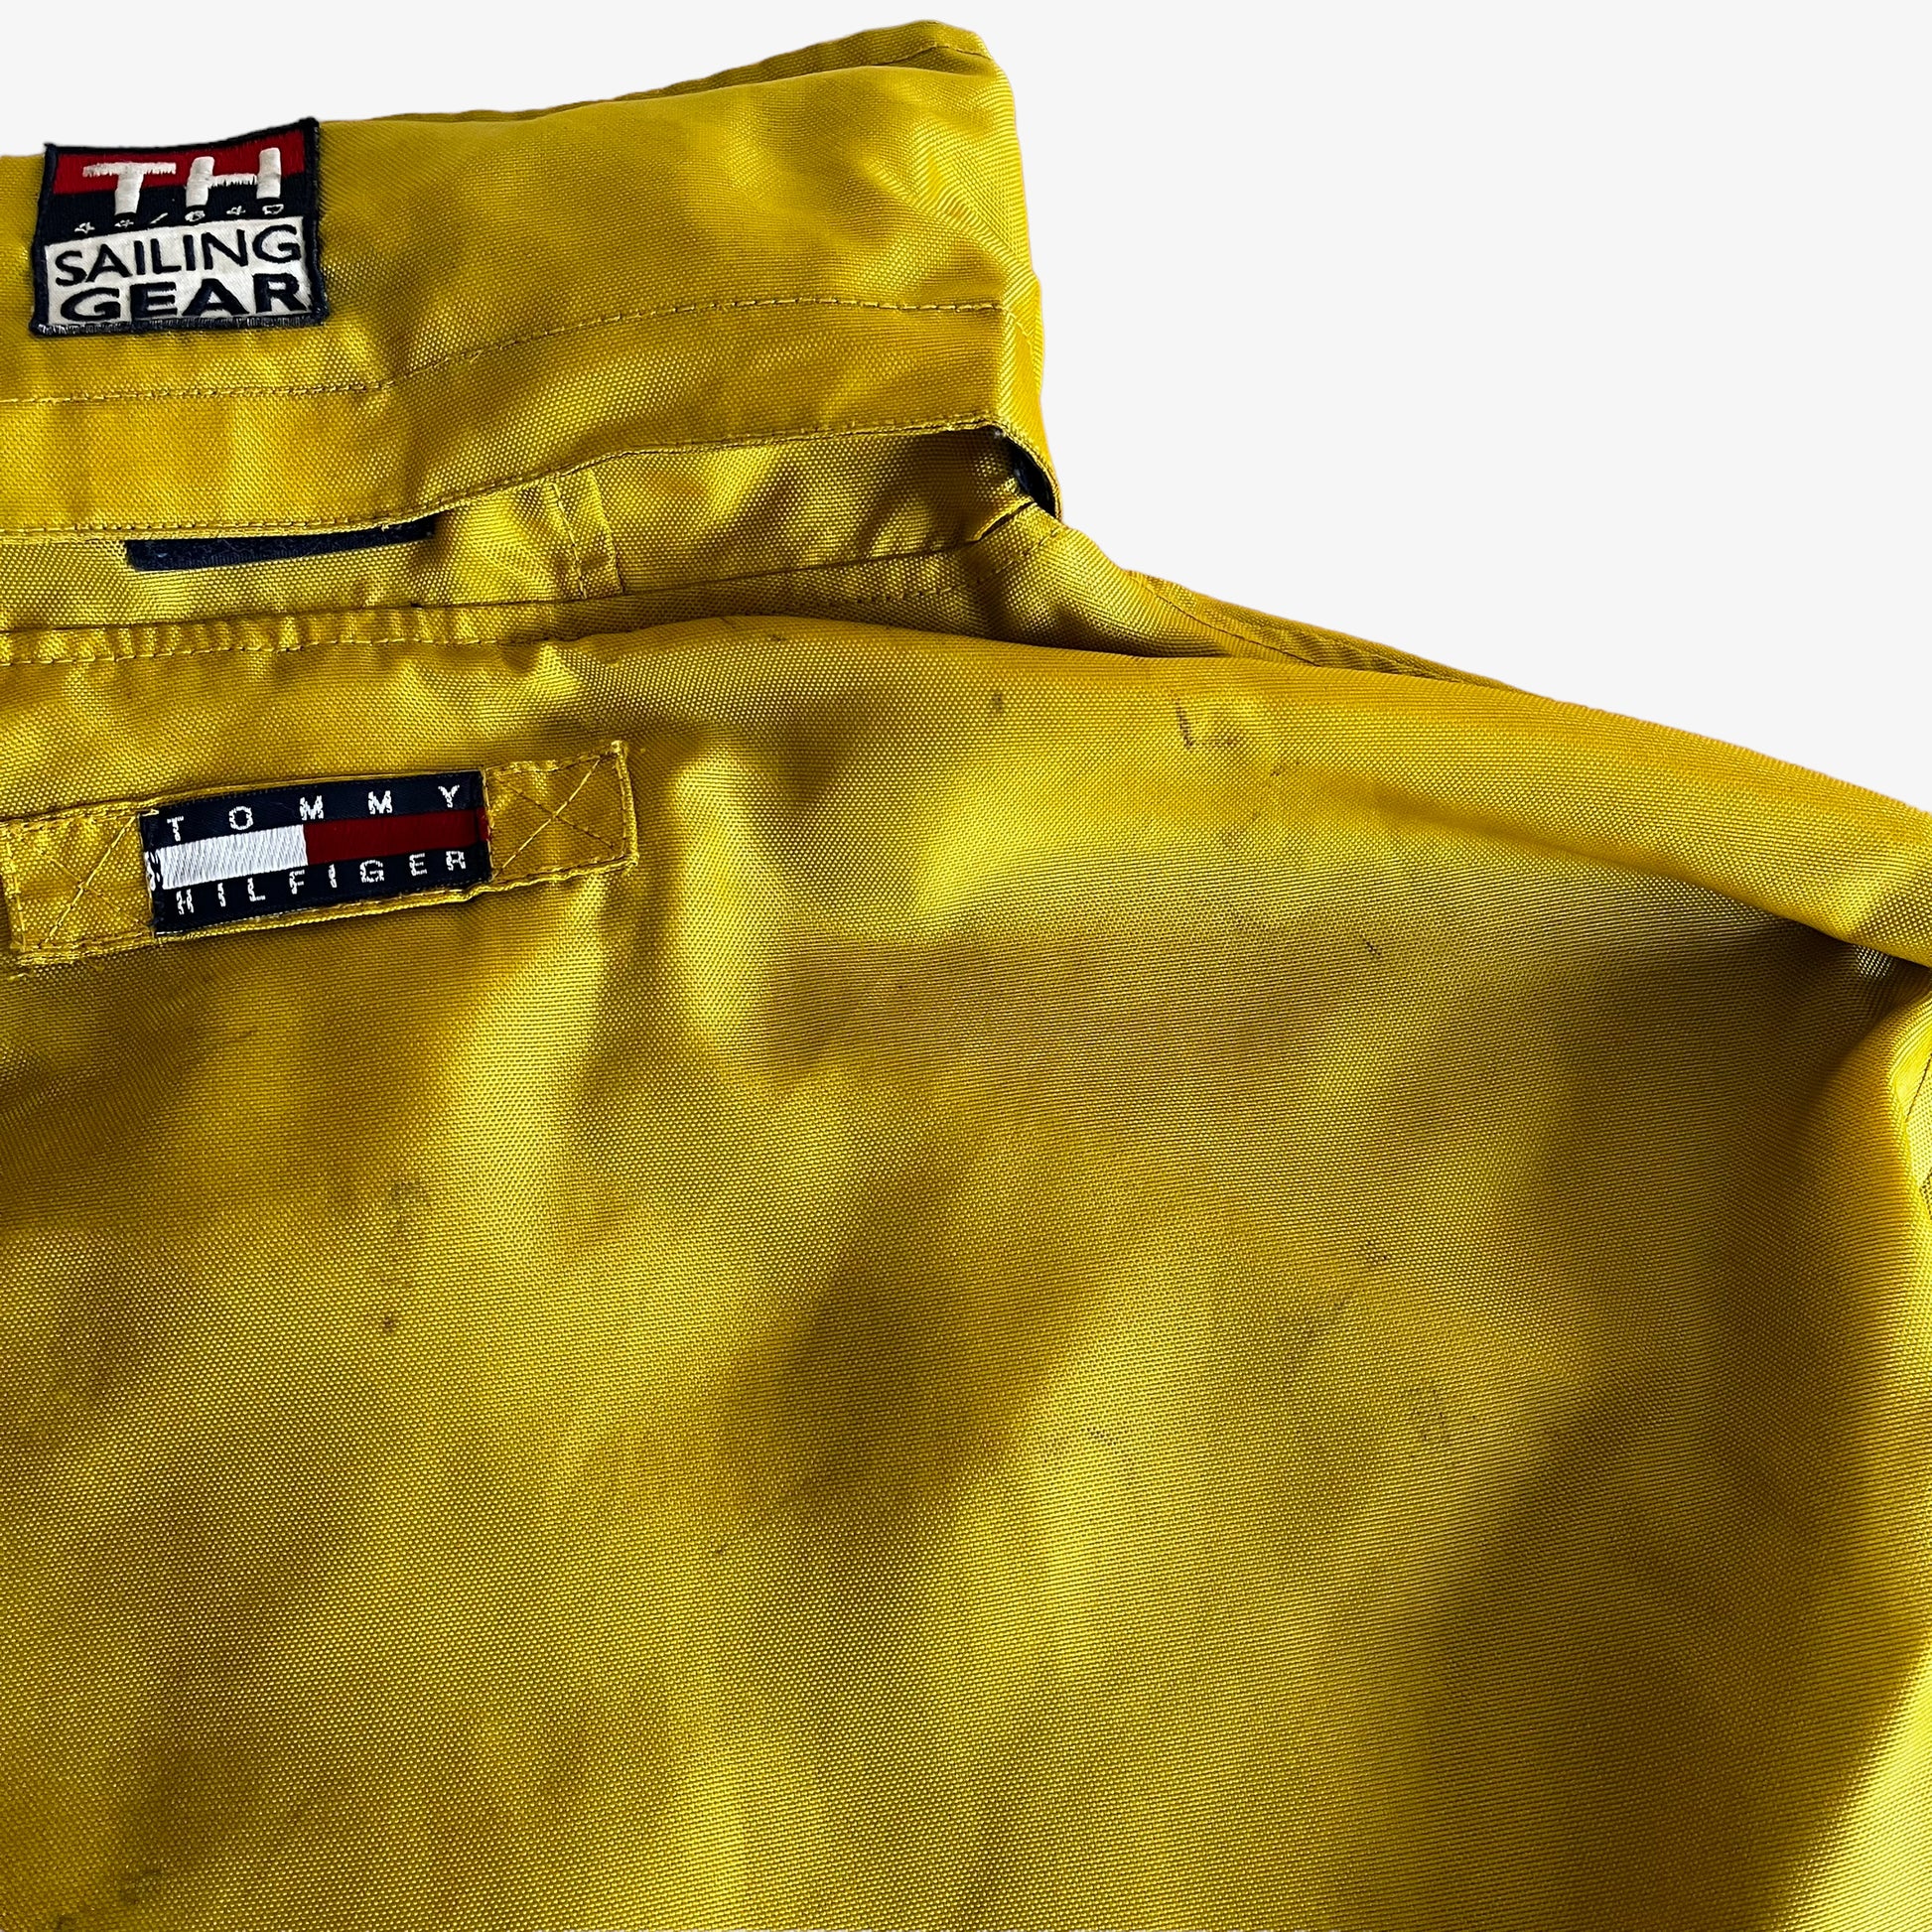 Vintage 90s Tommy Hilfiger Yellow Sailing Gear Jacket With Hook Fasteners Collar Wear - Casspios Dream